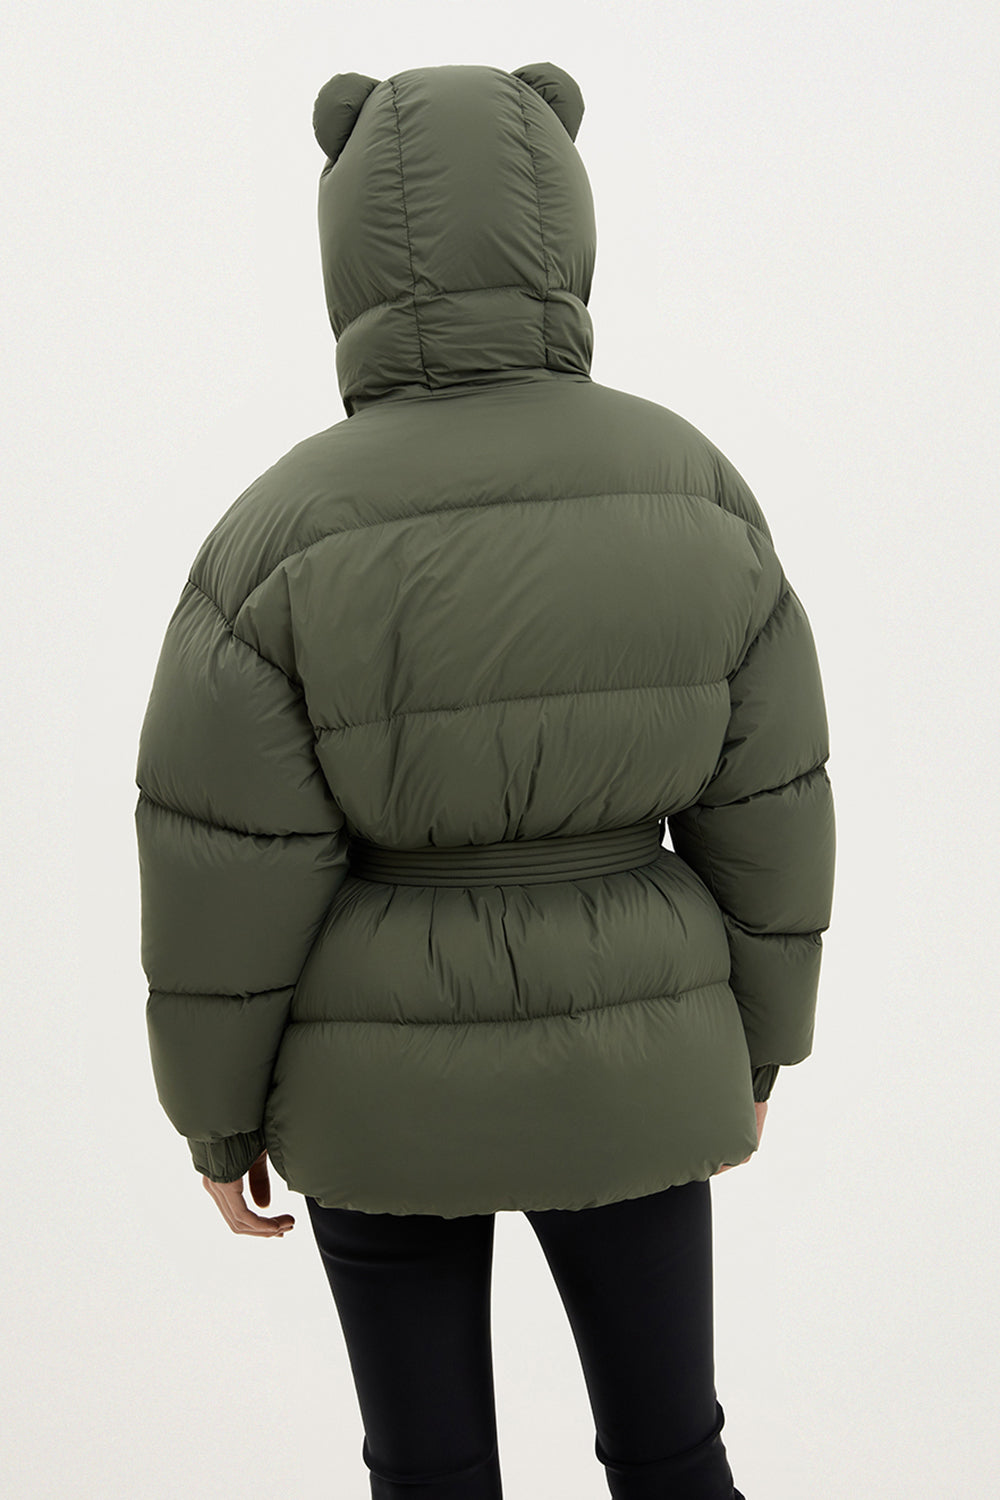 hooded green jacket with ears for cold weather